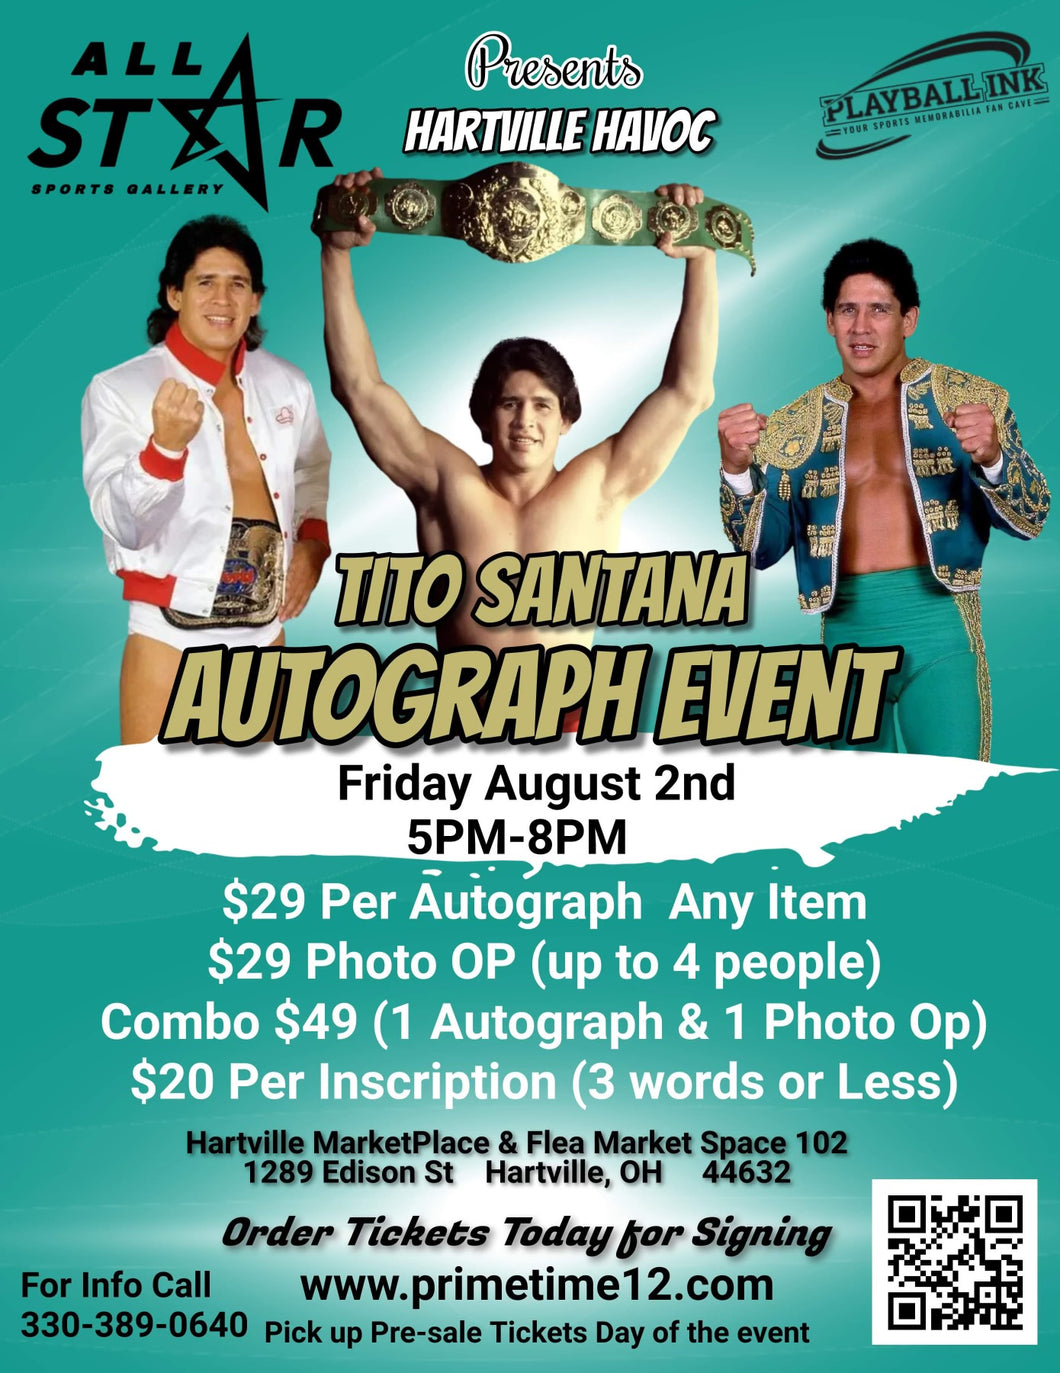 TITO SANTANA Pre-Sale for PHOTO OP ticket to have your photo taken with him